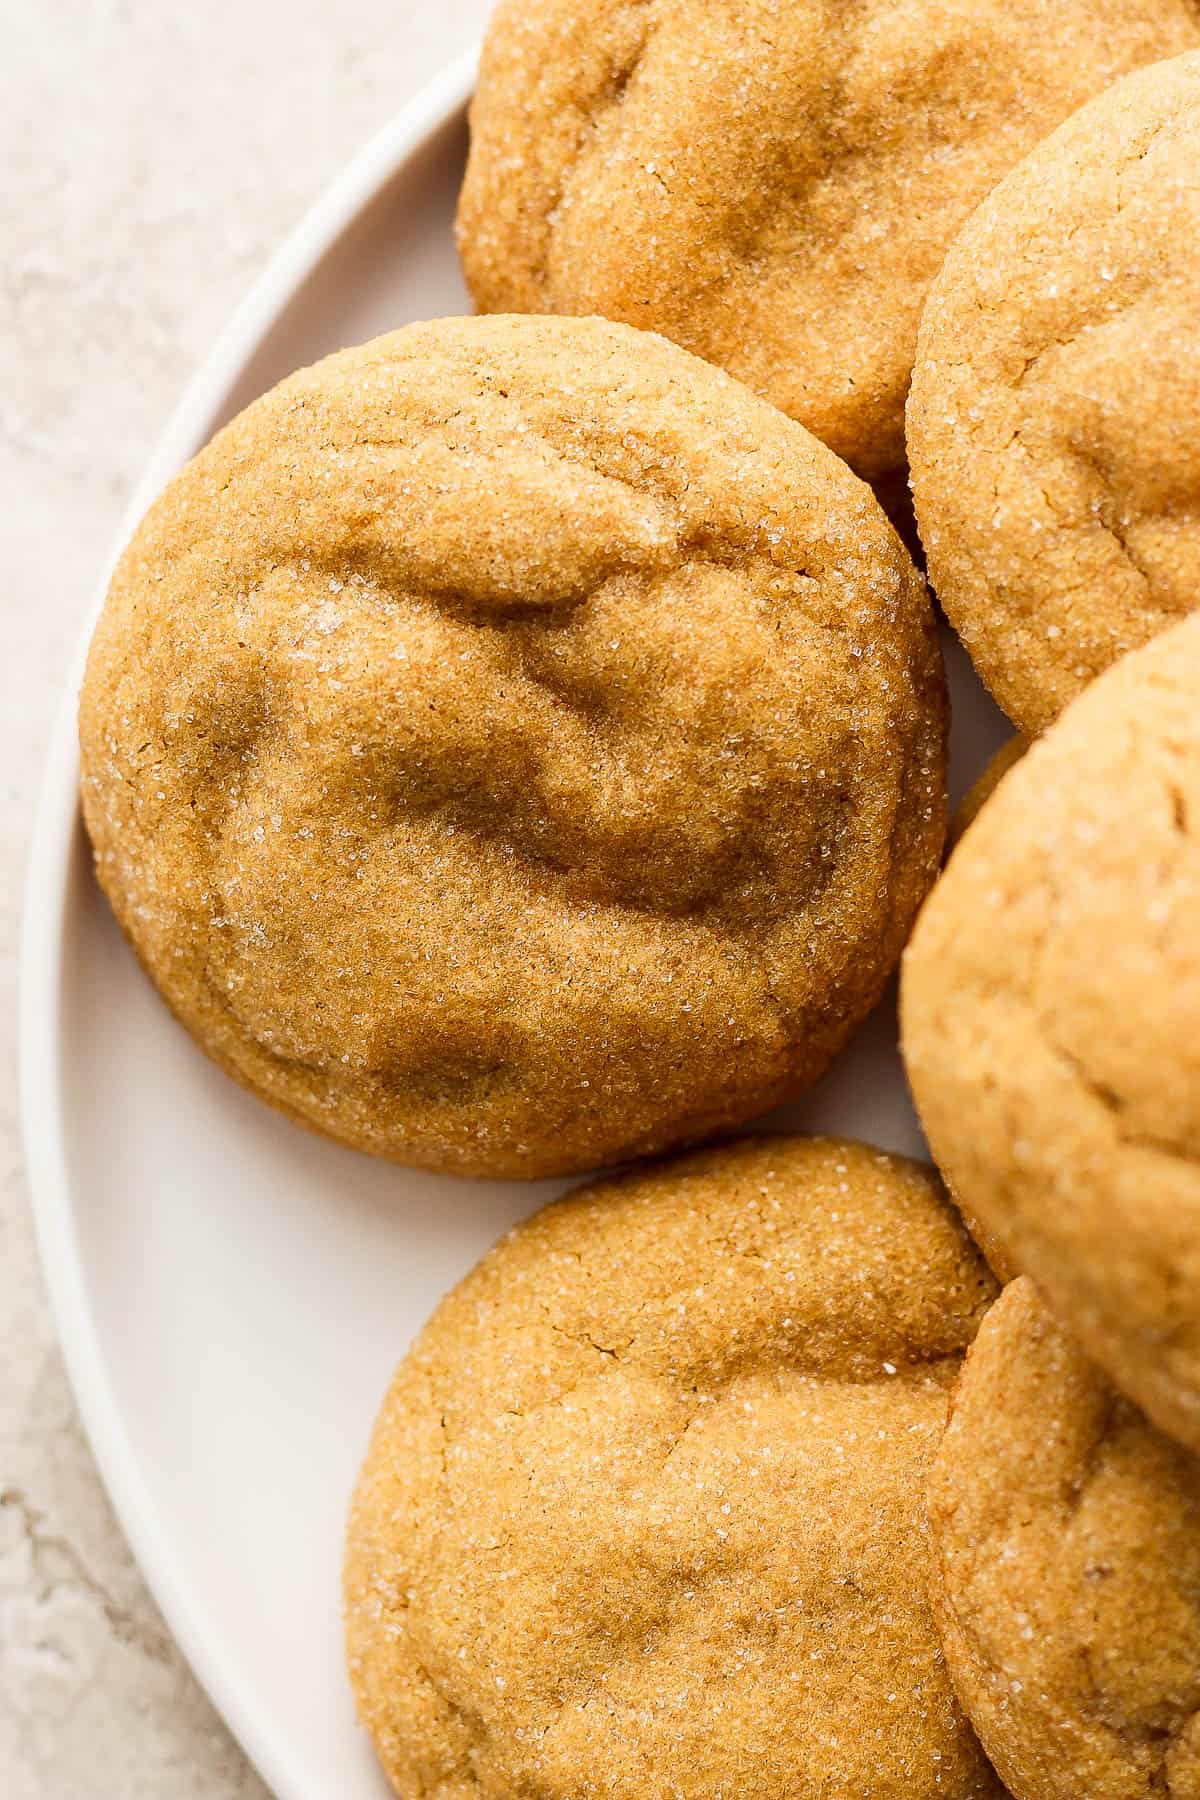 5 gluten-free molasses cookies on a plate.